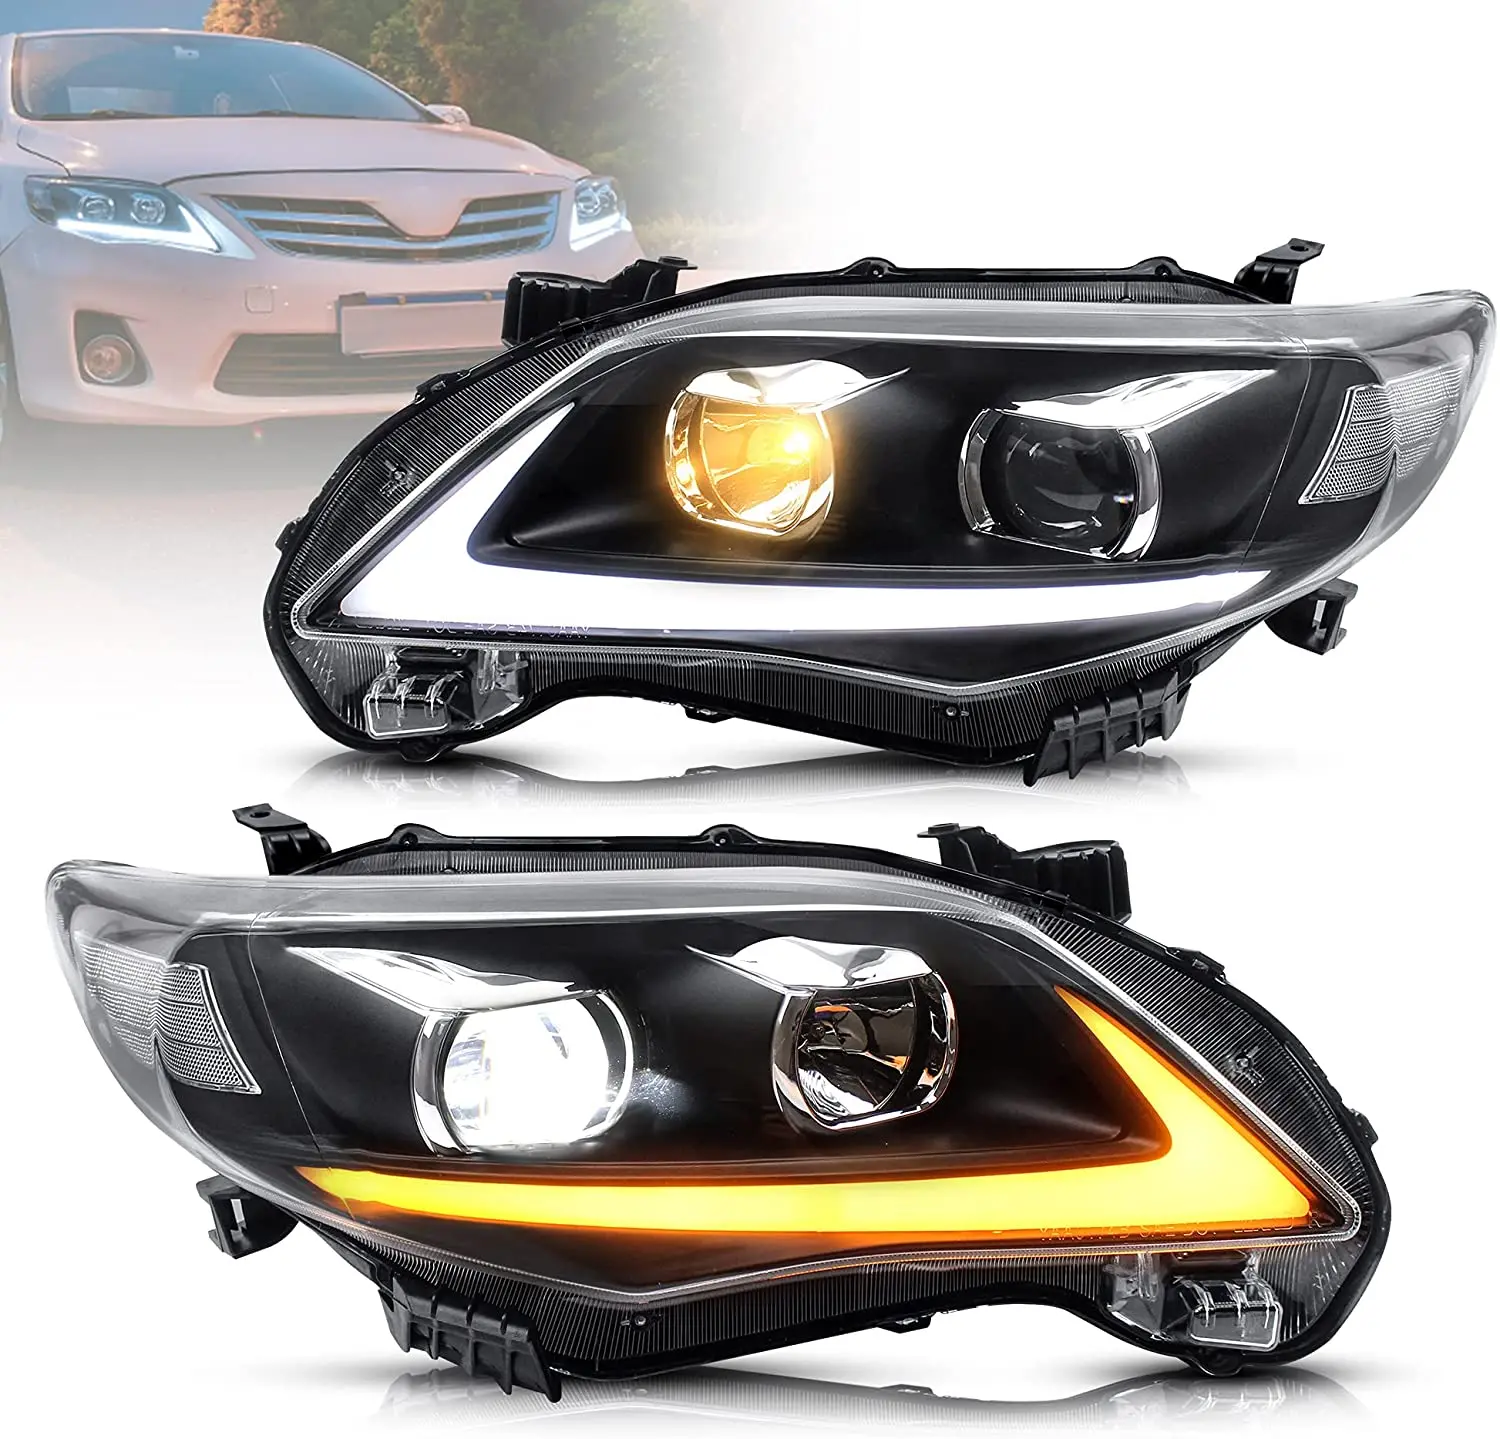 Headlamp Assembly for Toyota COROLLA 2011 2012 2013 Headlight Full LED with DRL Turn Signal Light Car Accessories